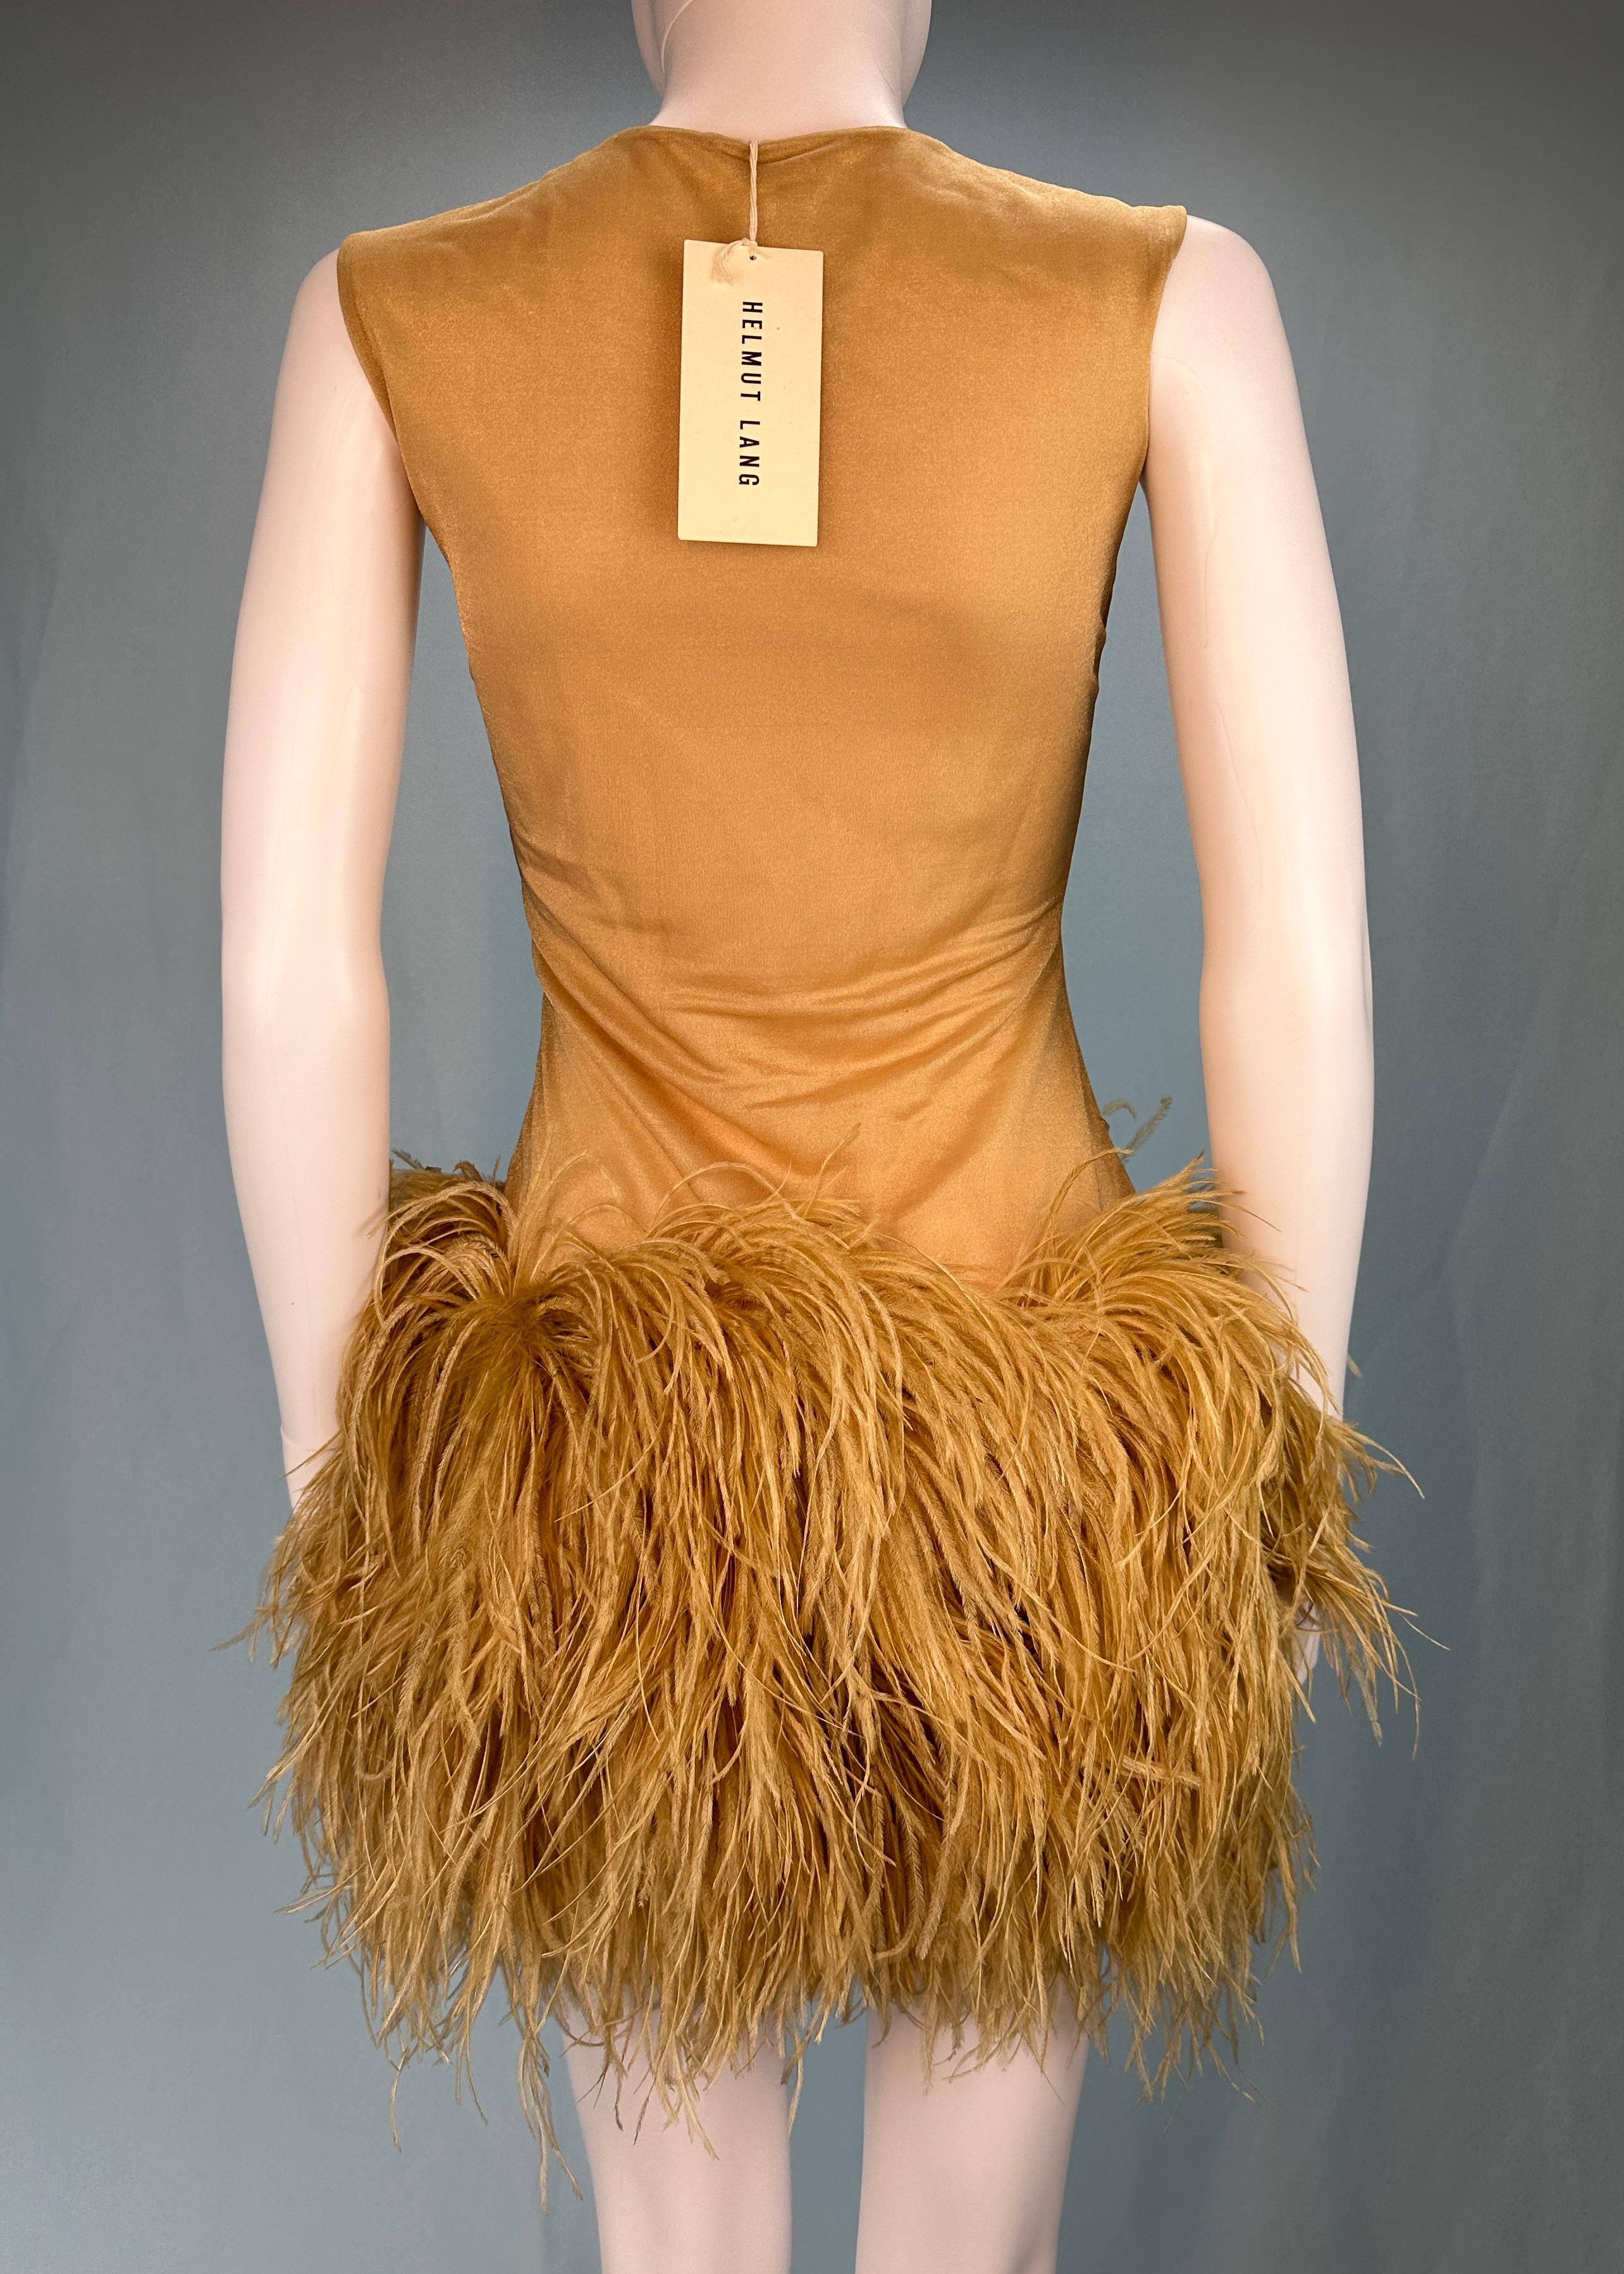 Helmut Lang Fall 1990 Runway Feather Trim Dress For Sale 2